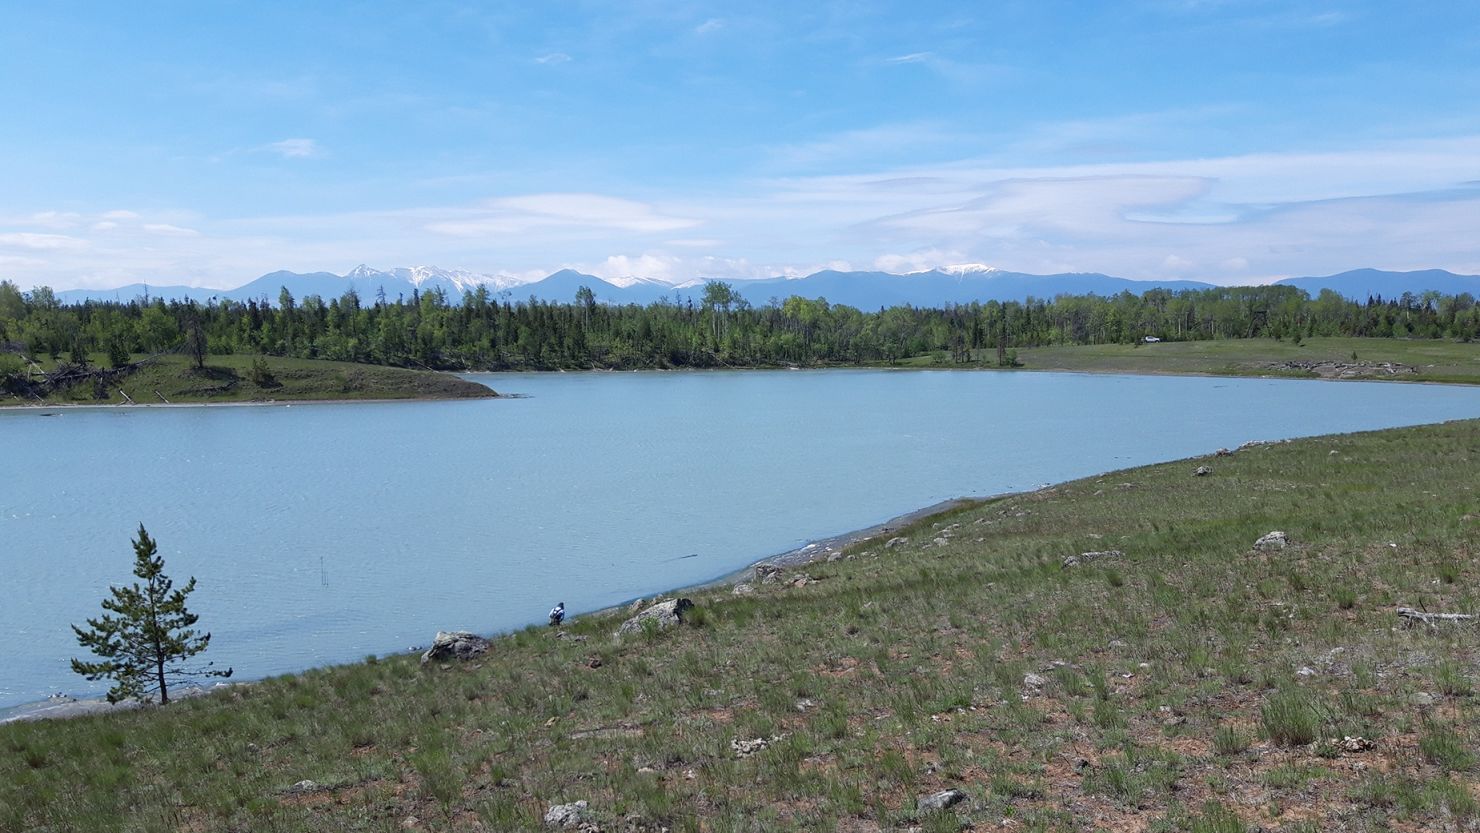 British Columbia's Last Chance Lake, pictured here during the wet season in June 2022, contains the highest levels of concentrated phosphate ever recorded in any natural body of water on Earth.